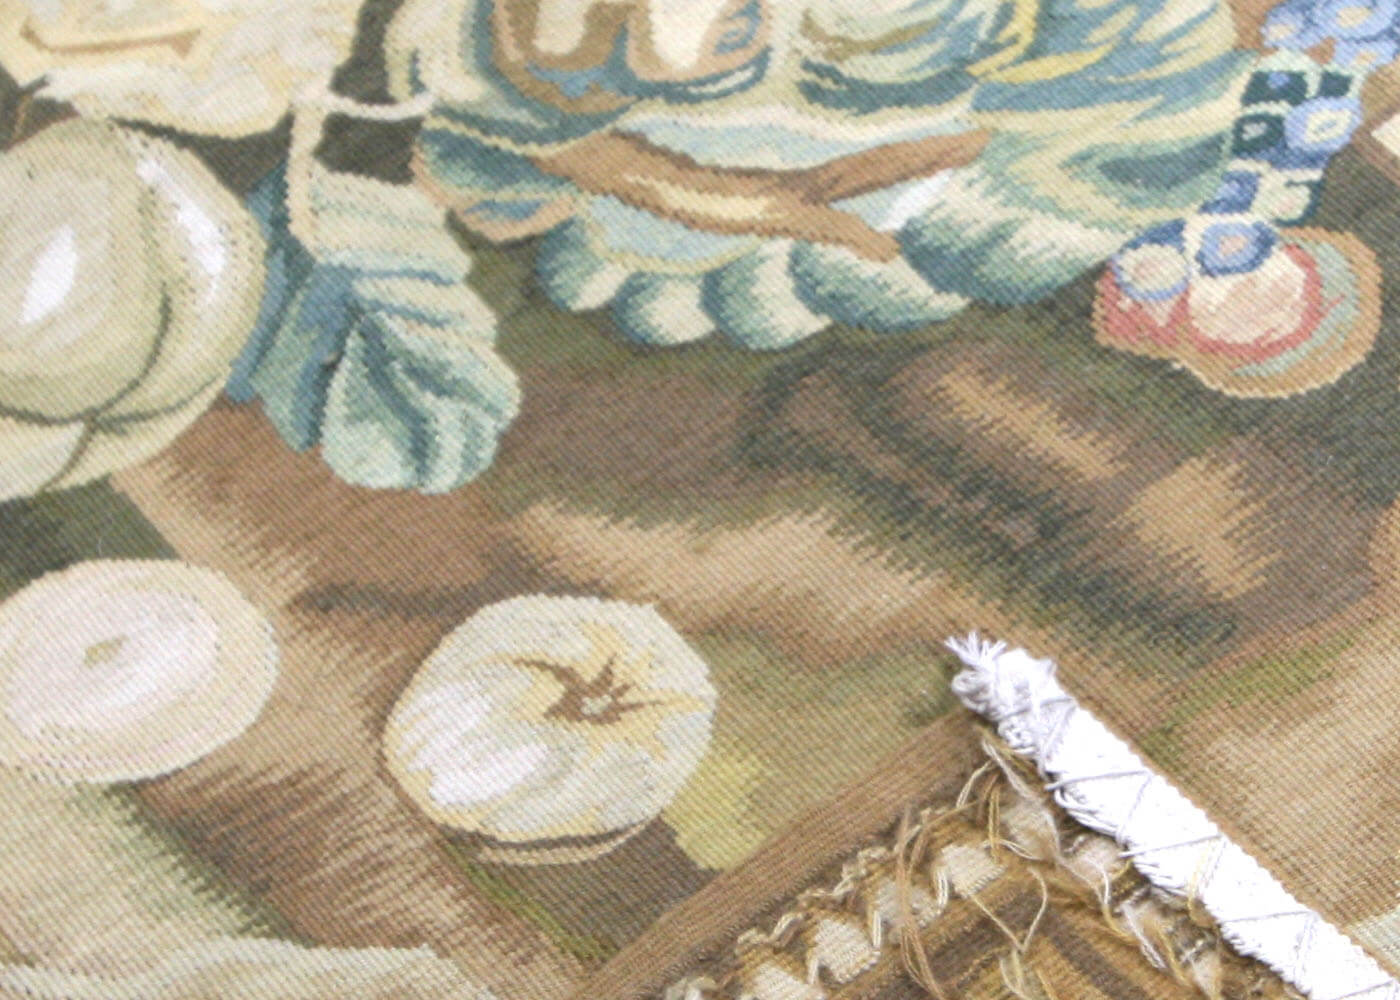 Vintage French Aubusson Tapestry - 4'5" x 6'6"